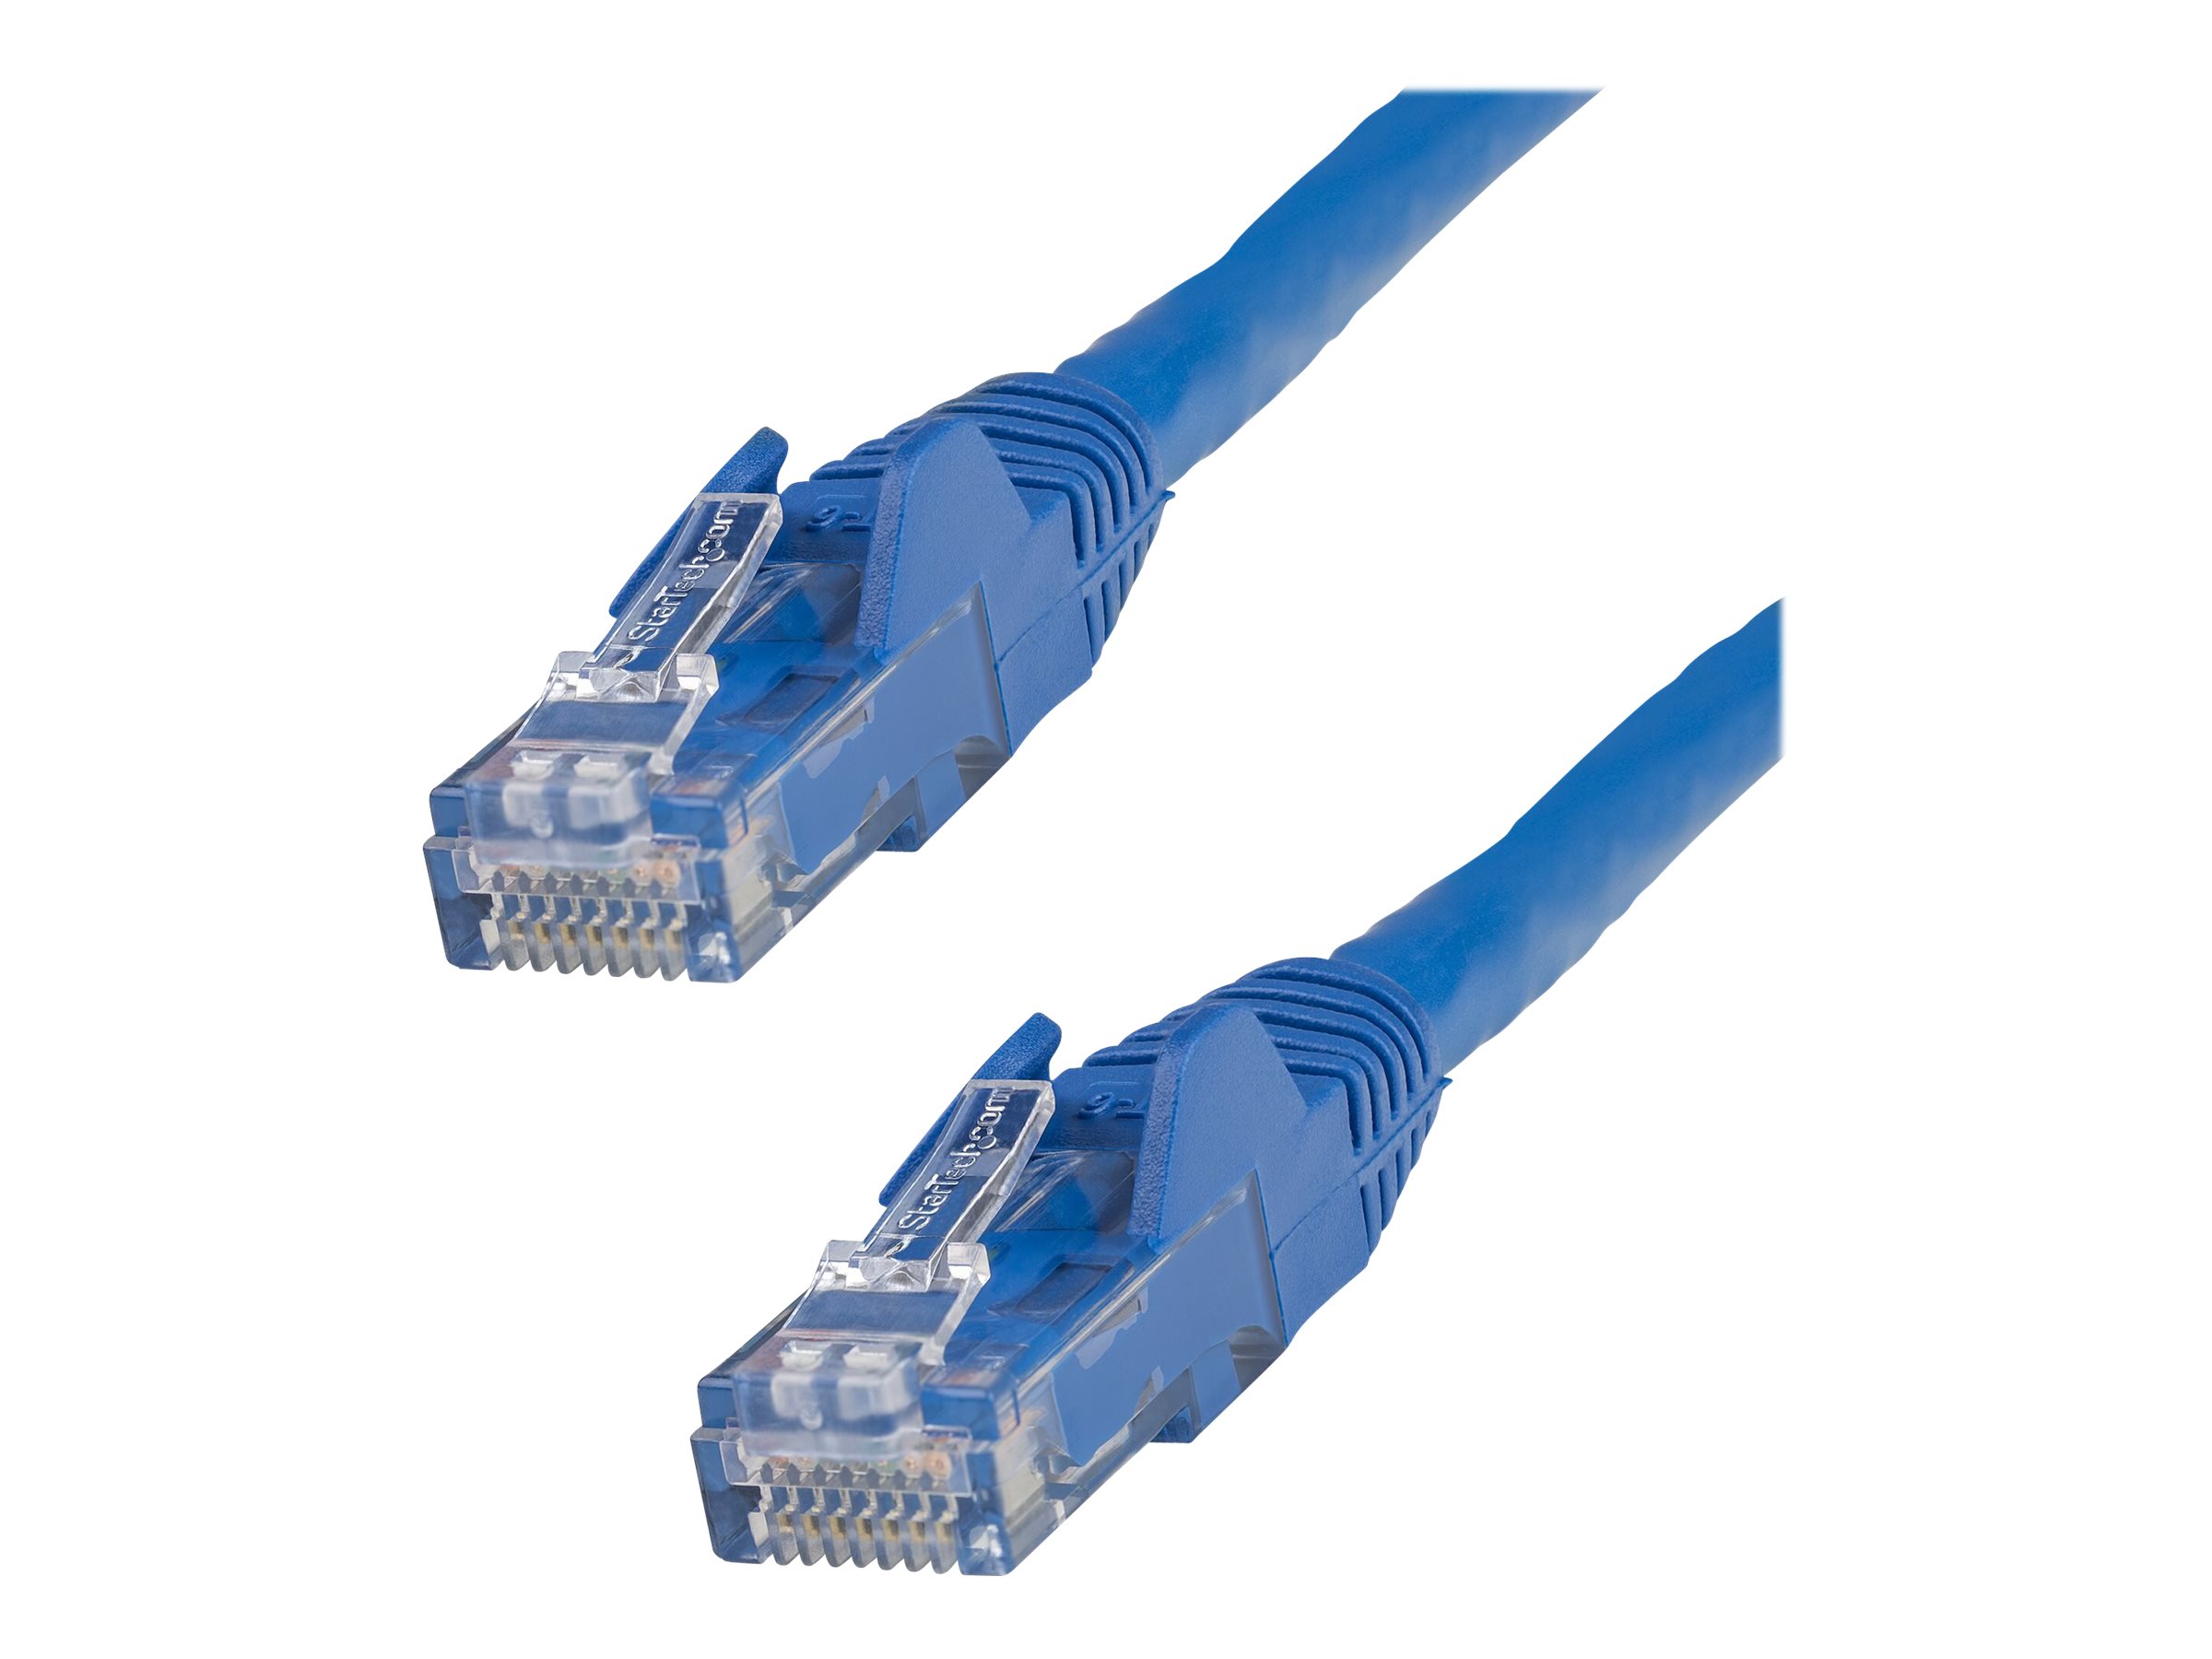 StarTech.com 75ft CAT6 Ethernet Cable, 10 Gigabit Snagless RJ45 650MHz 100W PoE Patch Cord, CAT 6 10GbE UTP Network Cable w/Strain Relief, Blue, Fluke Tested/Wiring is UL Certified/TIA